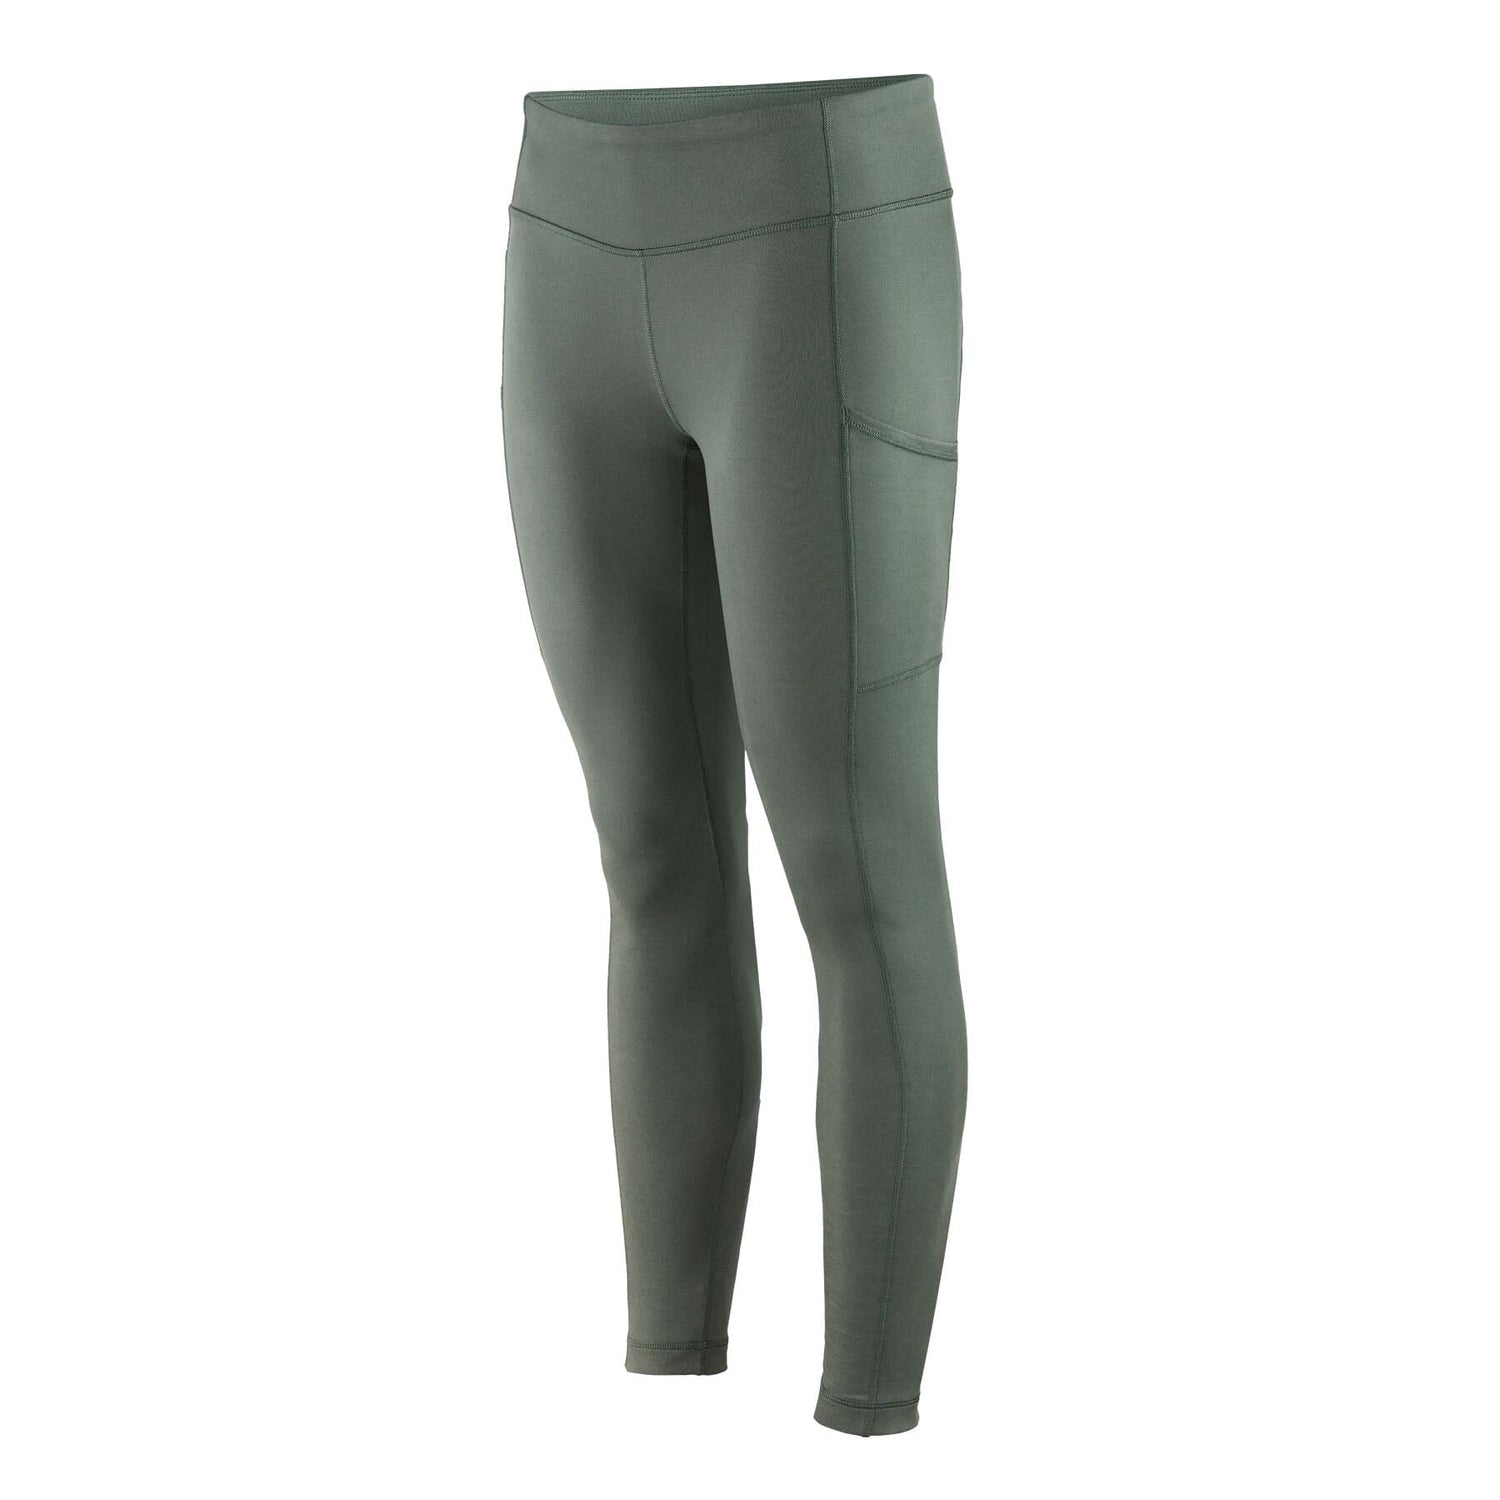 Patagonia W's Pack Out Tights - Bluesign® approved Polyester Hemlock Green Pants